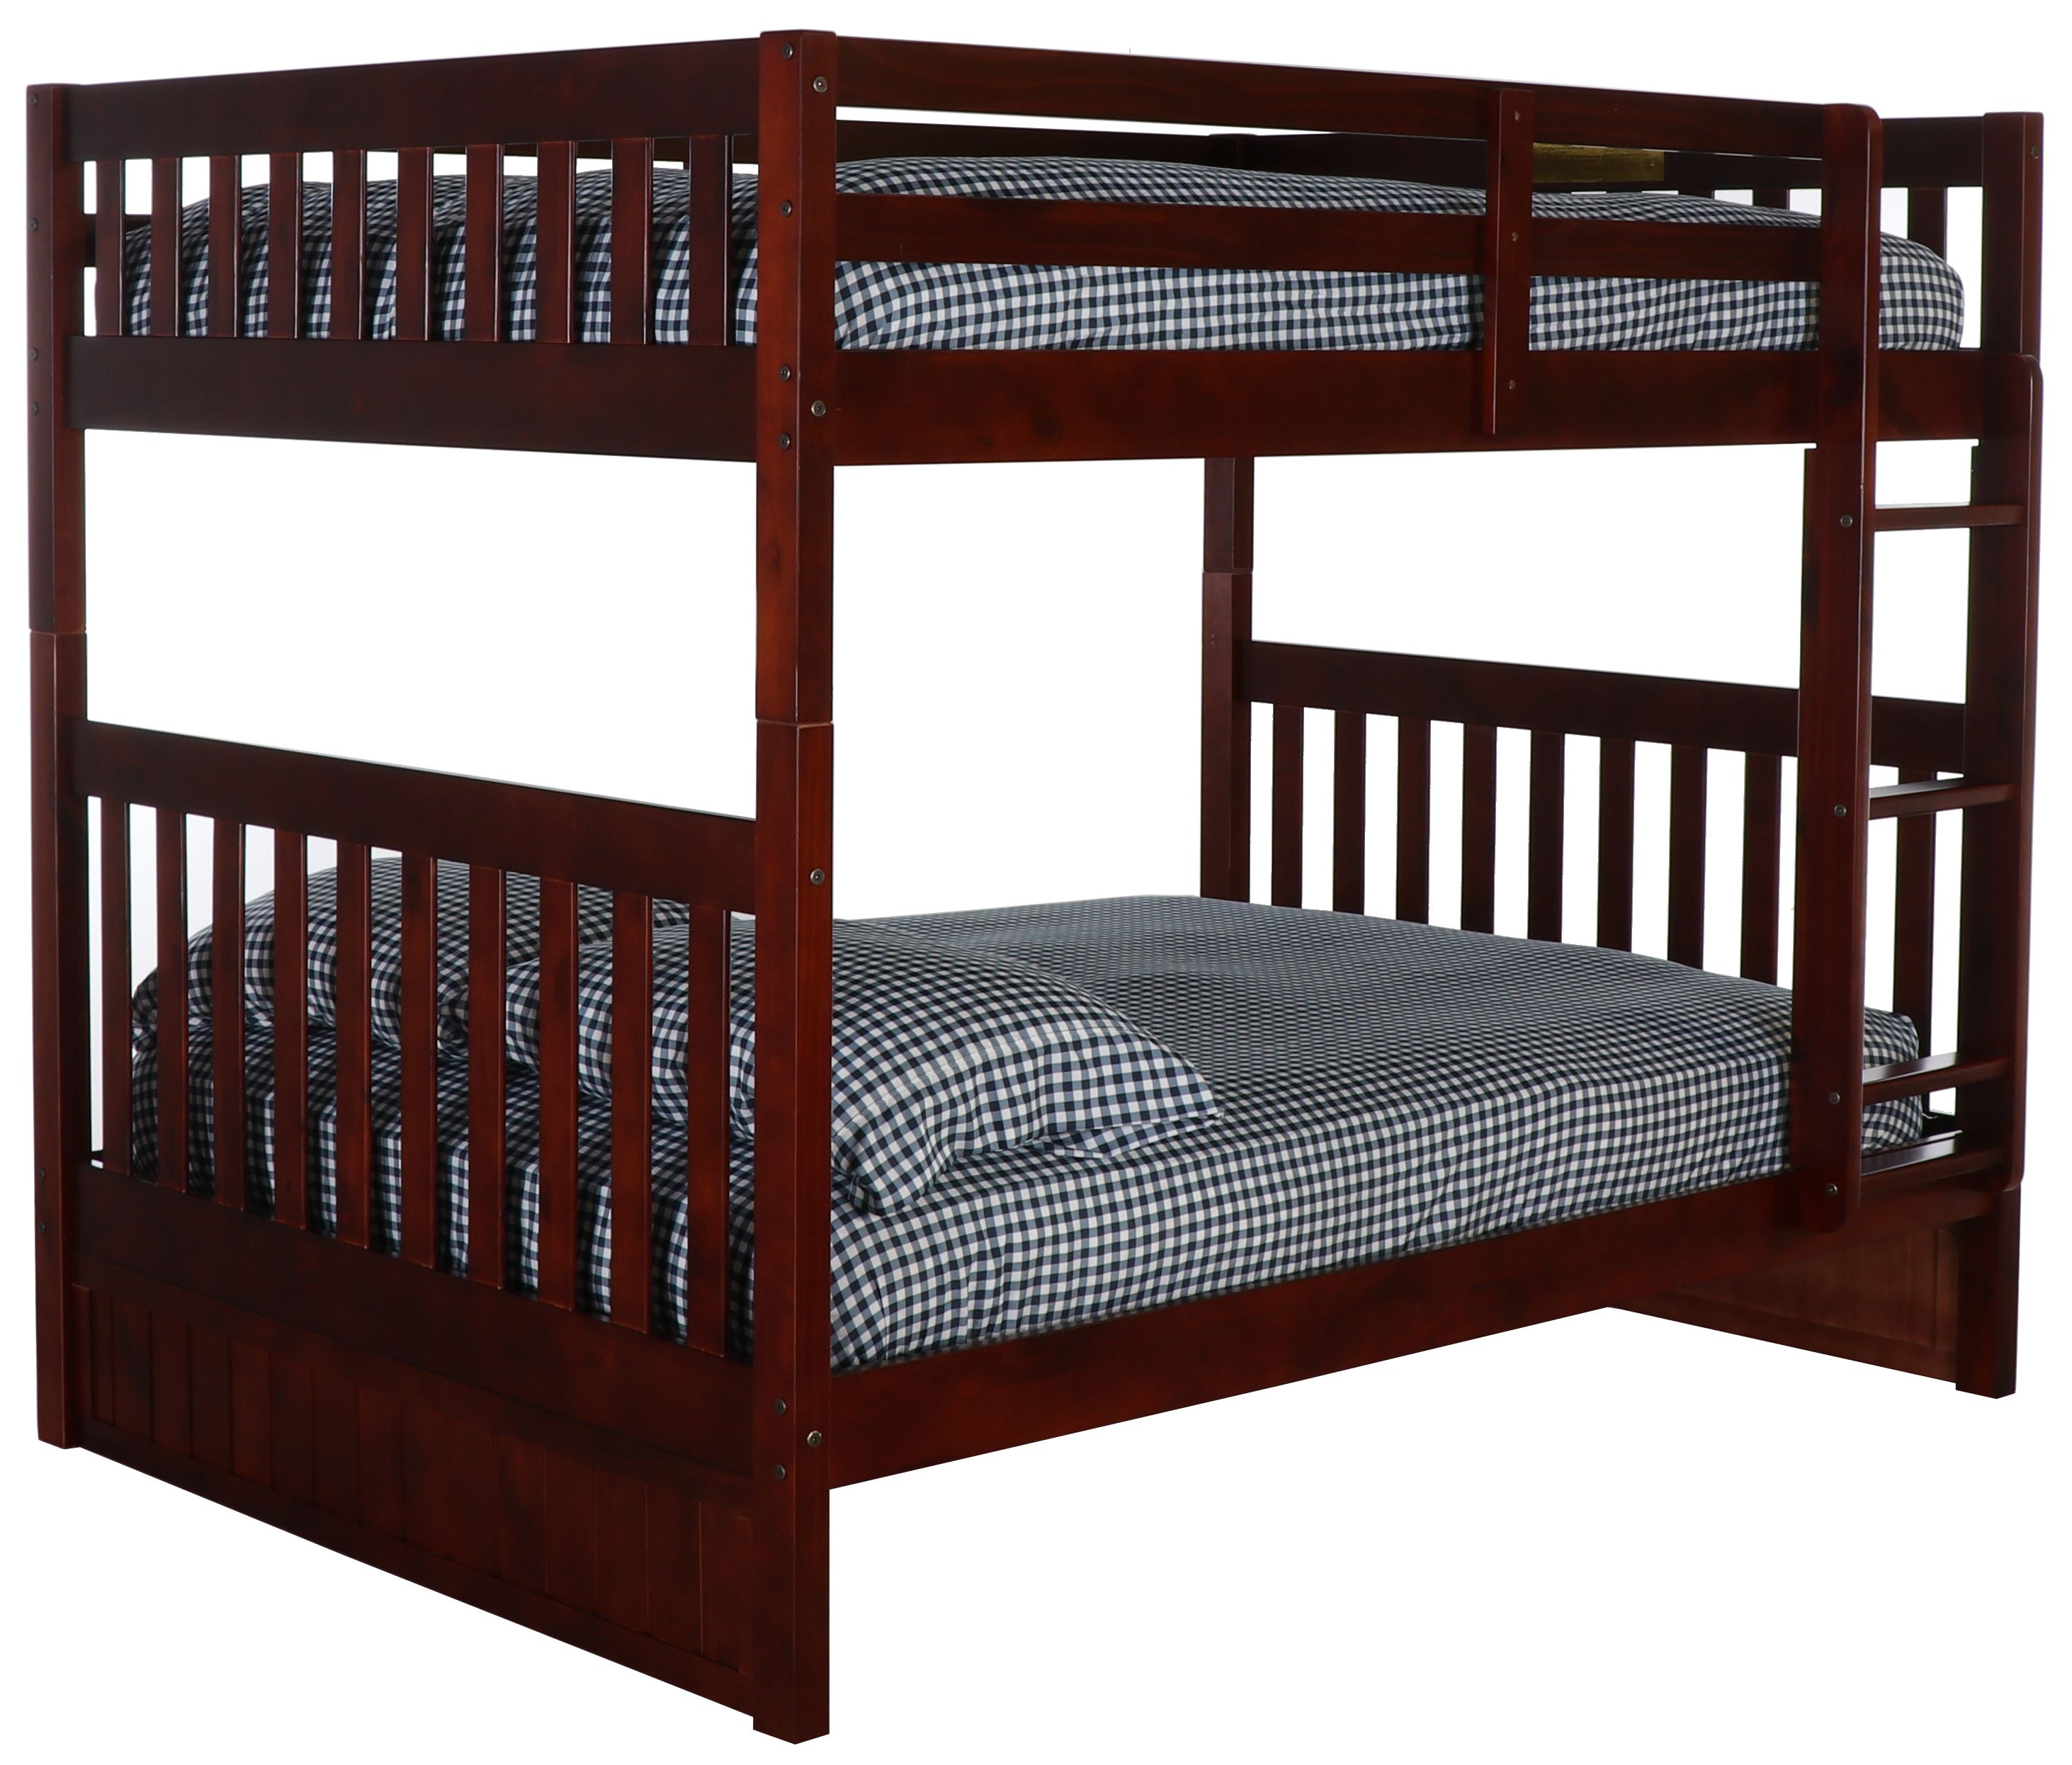 Donco Trading Company Mission Merlot Full/Full Bunk Bed